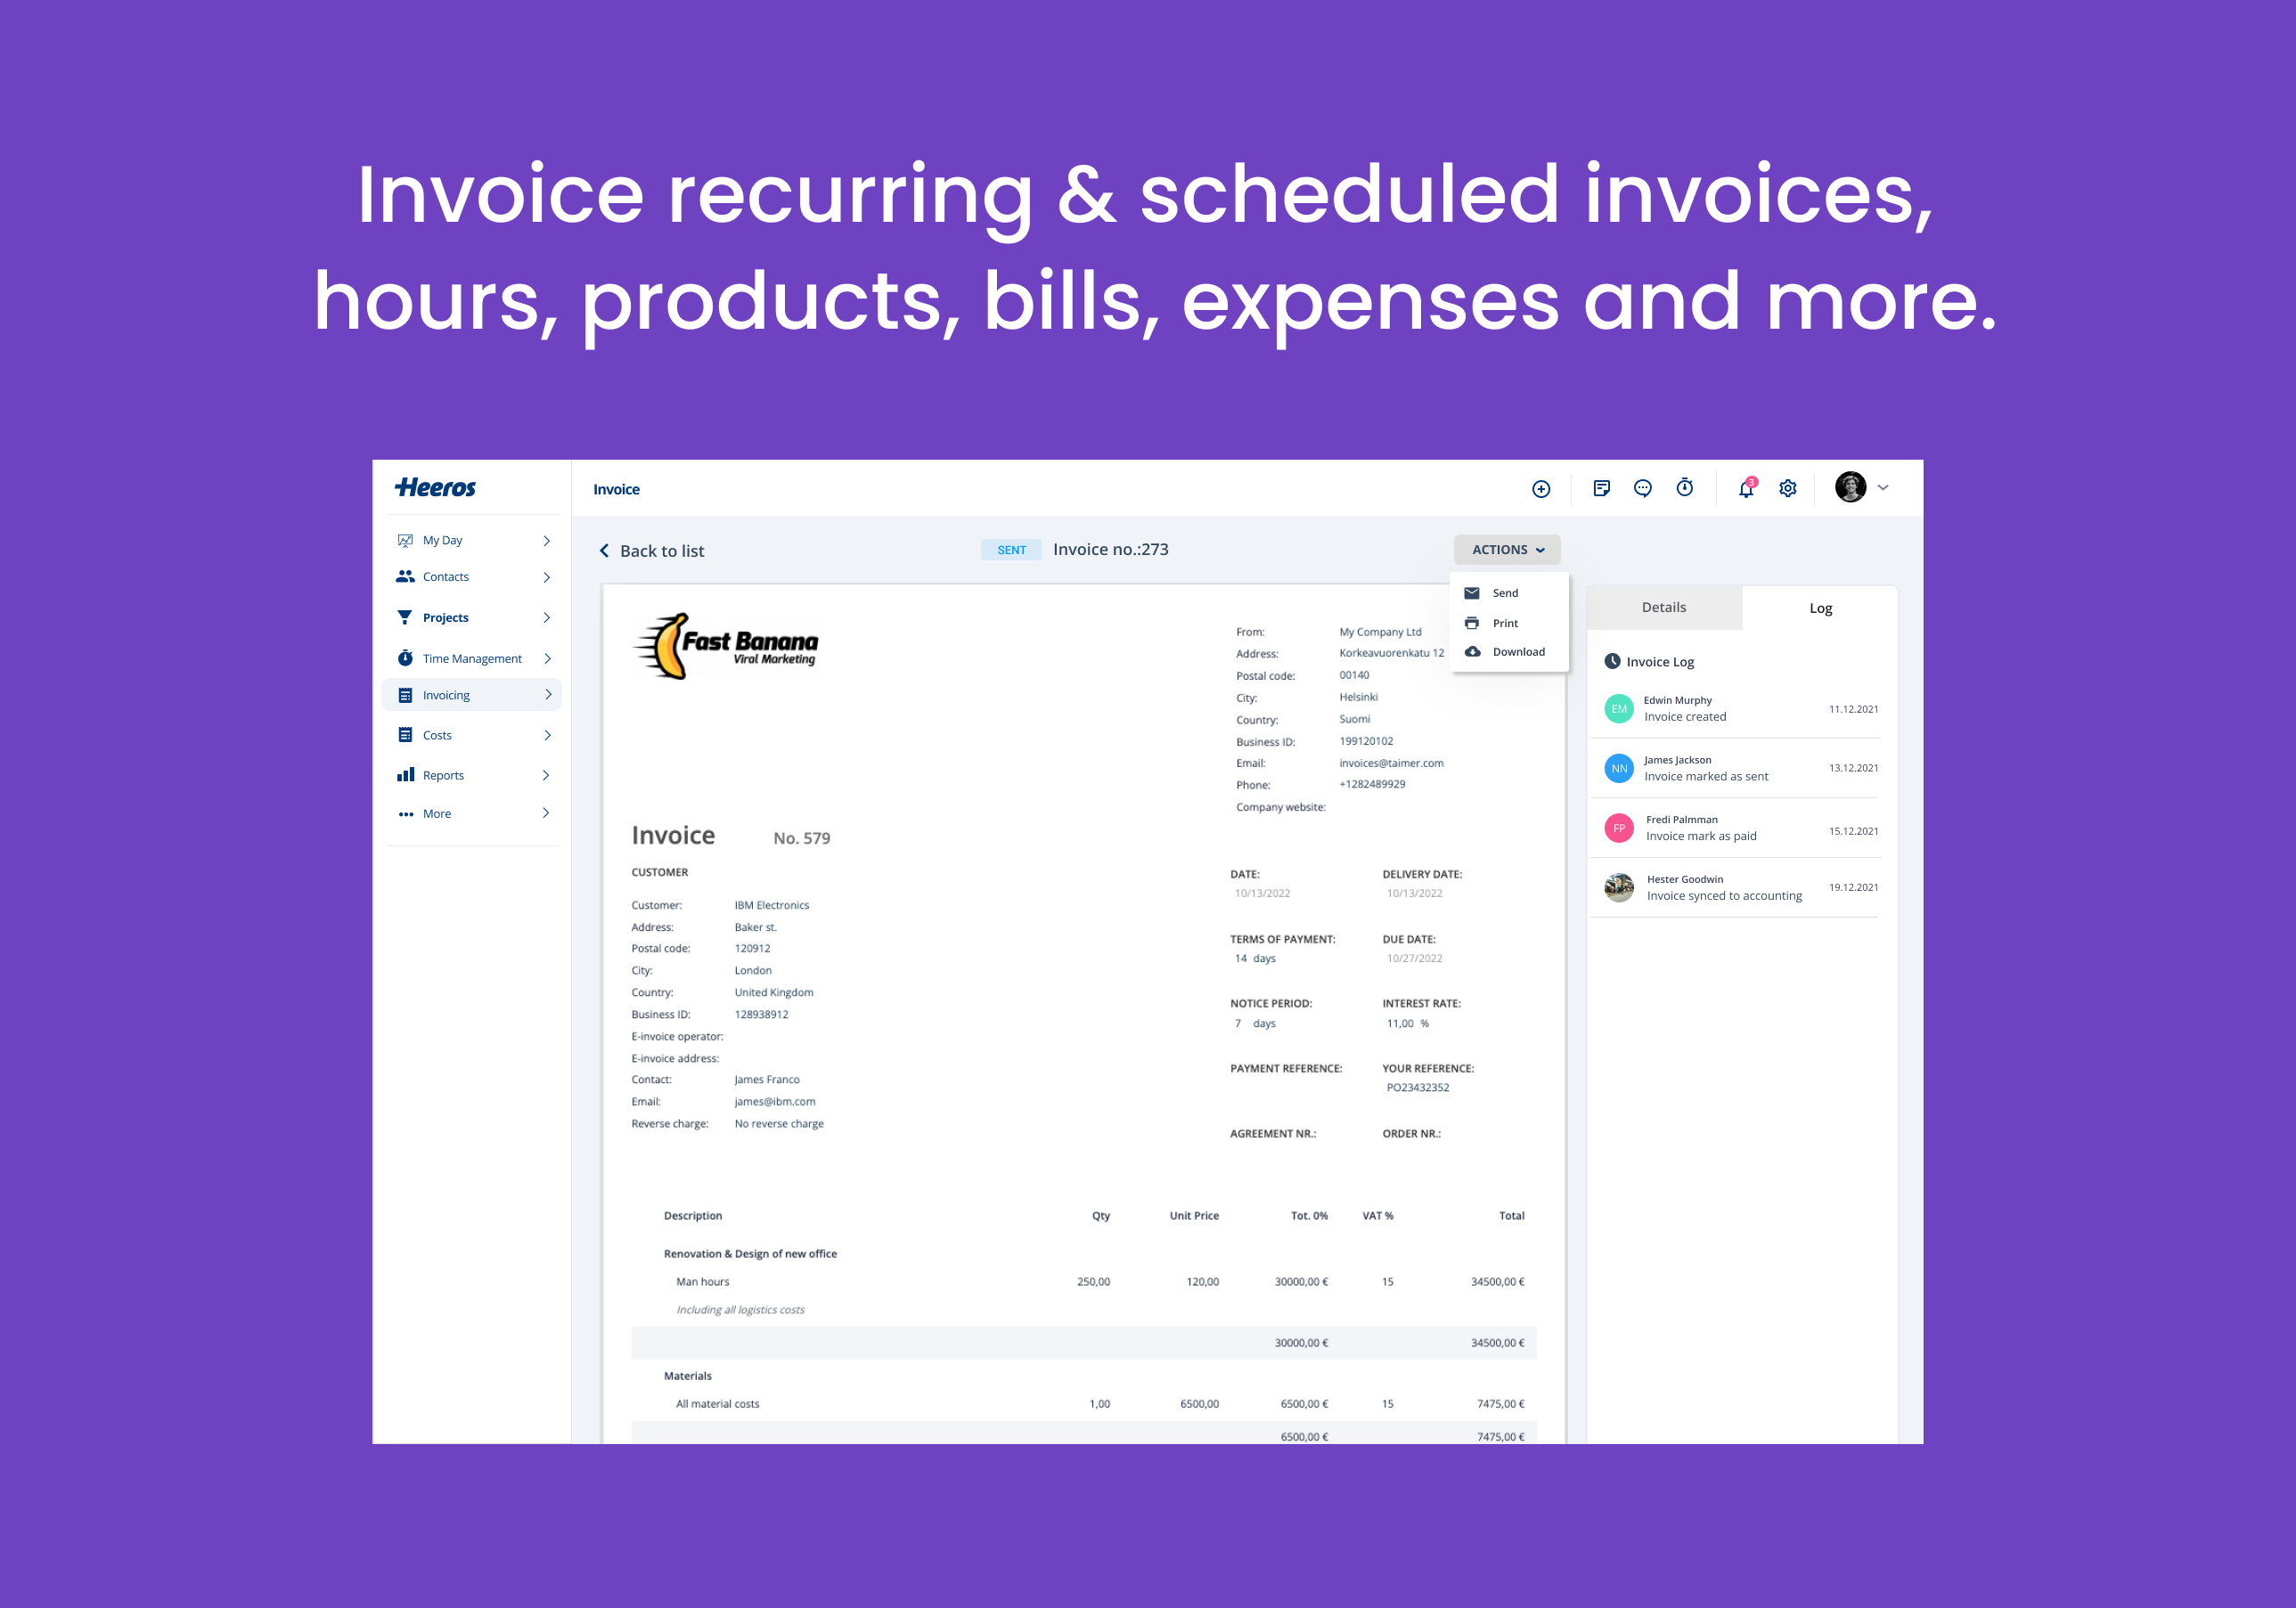 Invoicing hours, expenses, recurring and more..